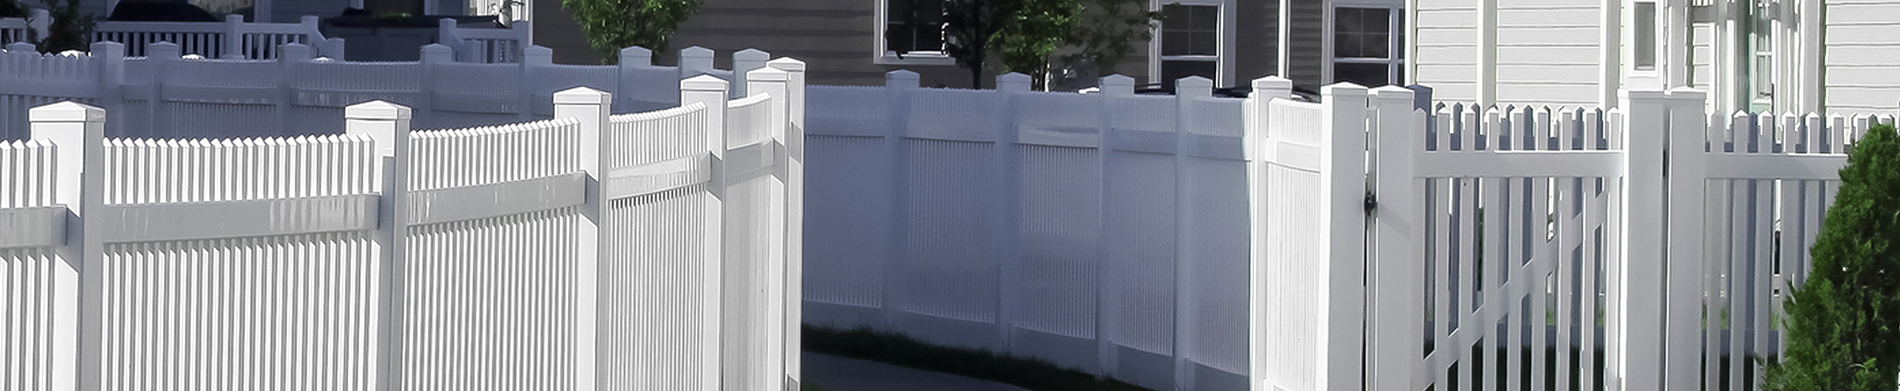 Want to Install Vinyl Fence-Here’s What You Need to Know